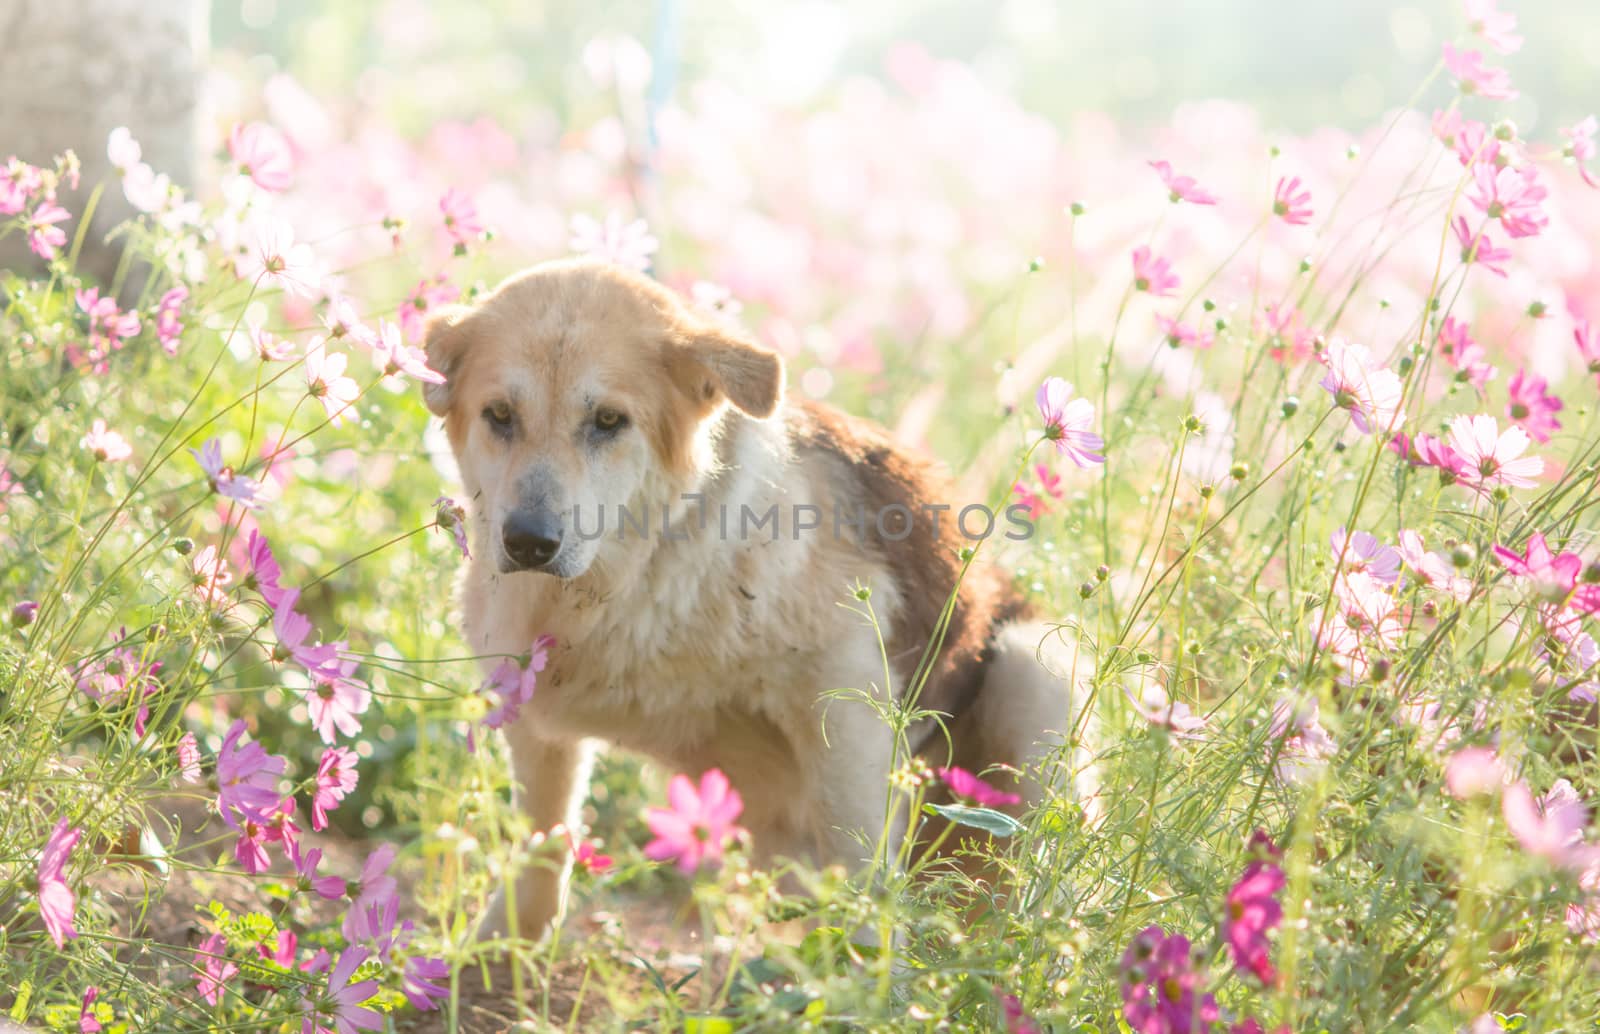 Blurry dog and flower for background  by yuiyuize